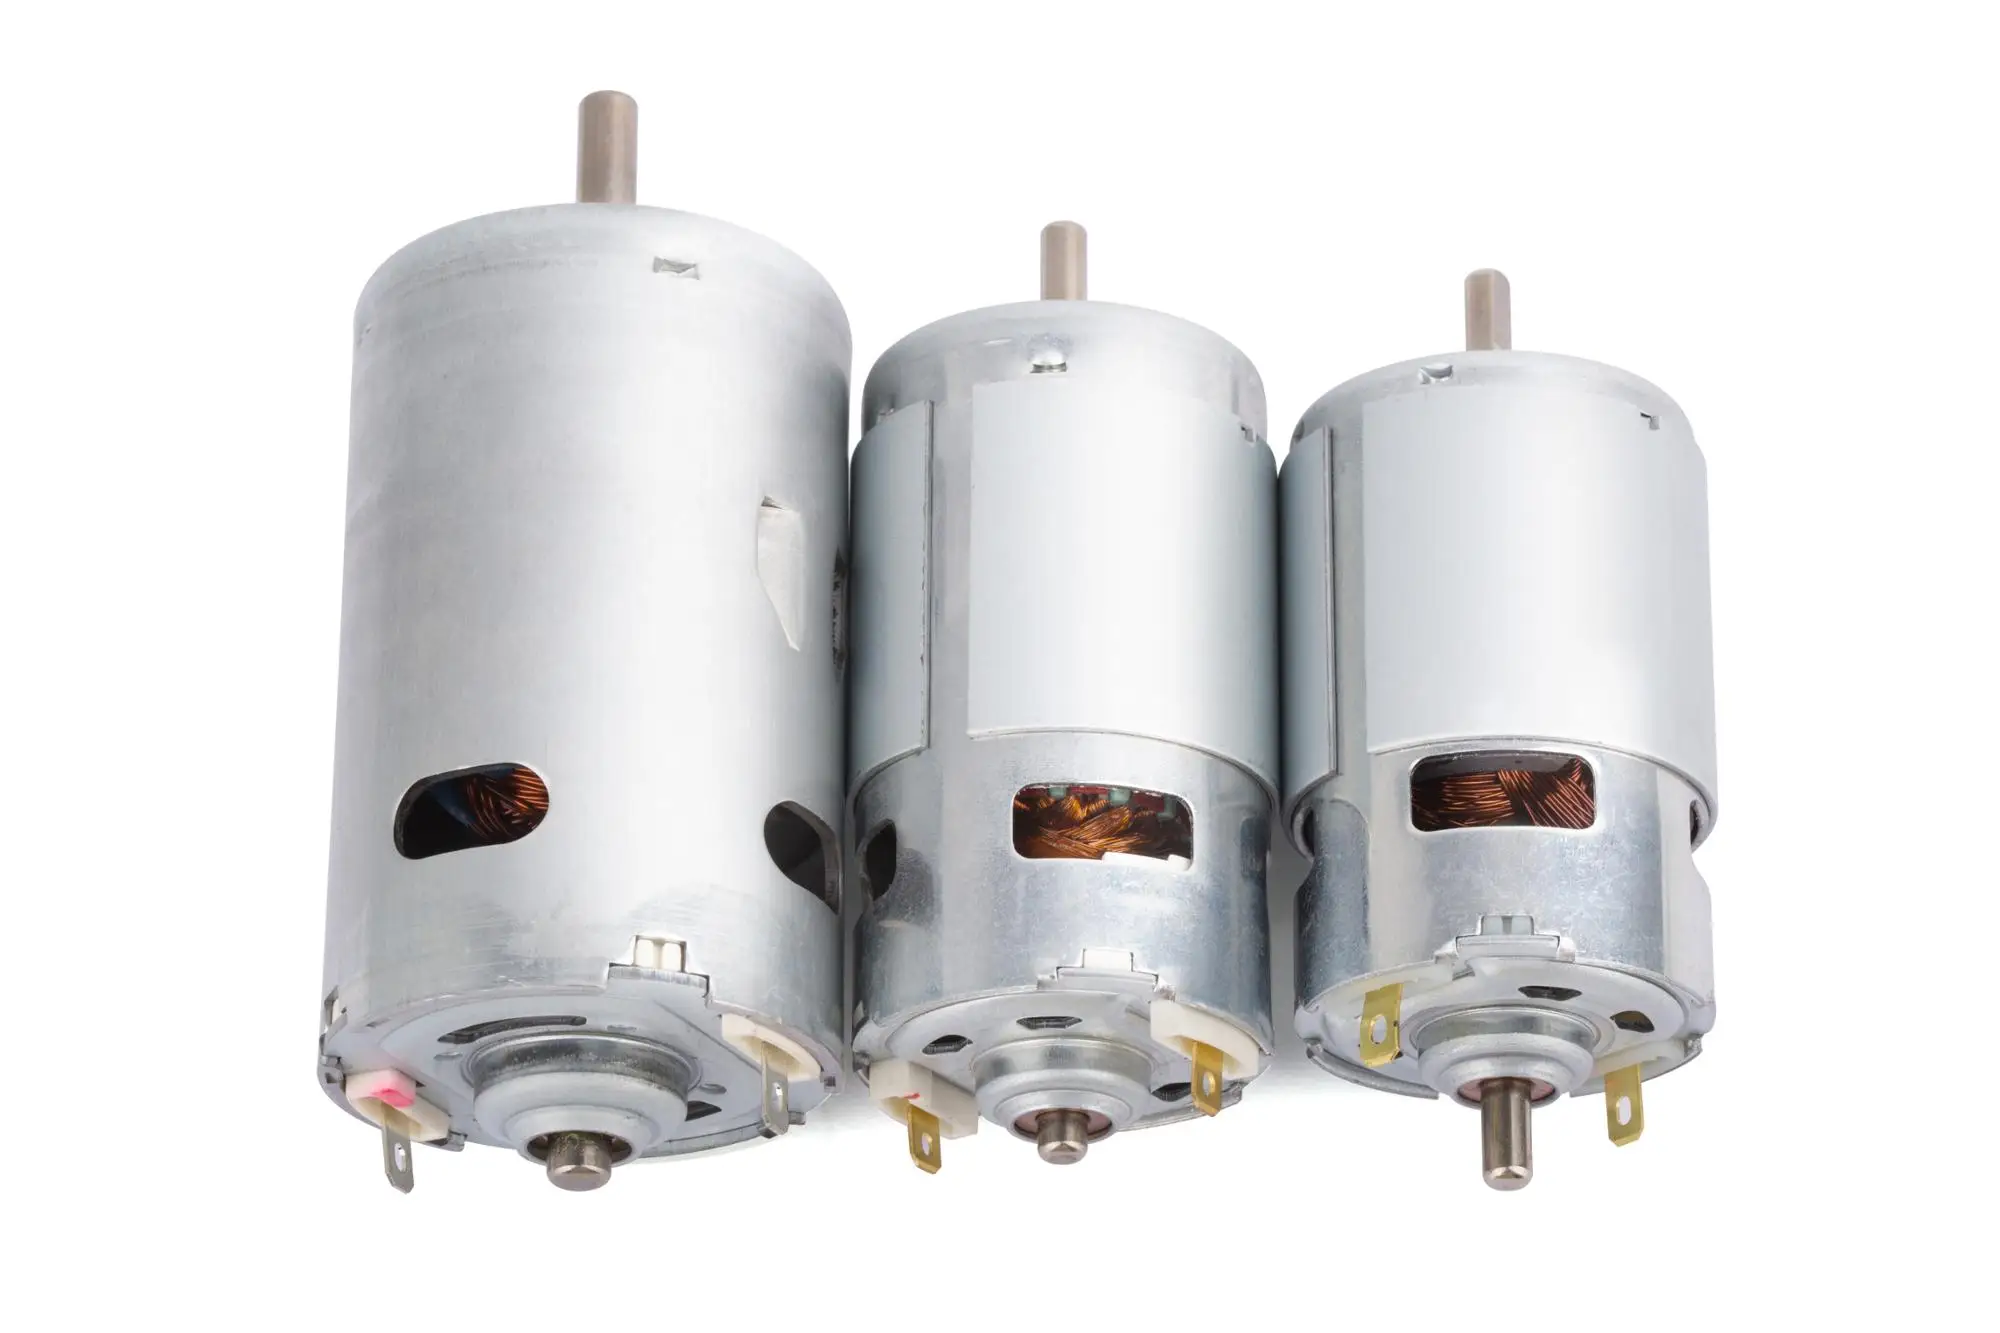 Permanent Magnet Dc Motor Price In India With 5mm Diameter Shaft - Buy